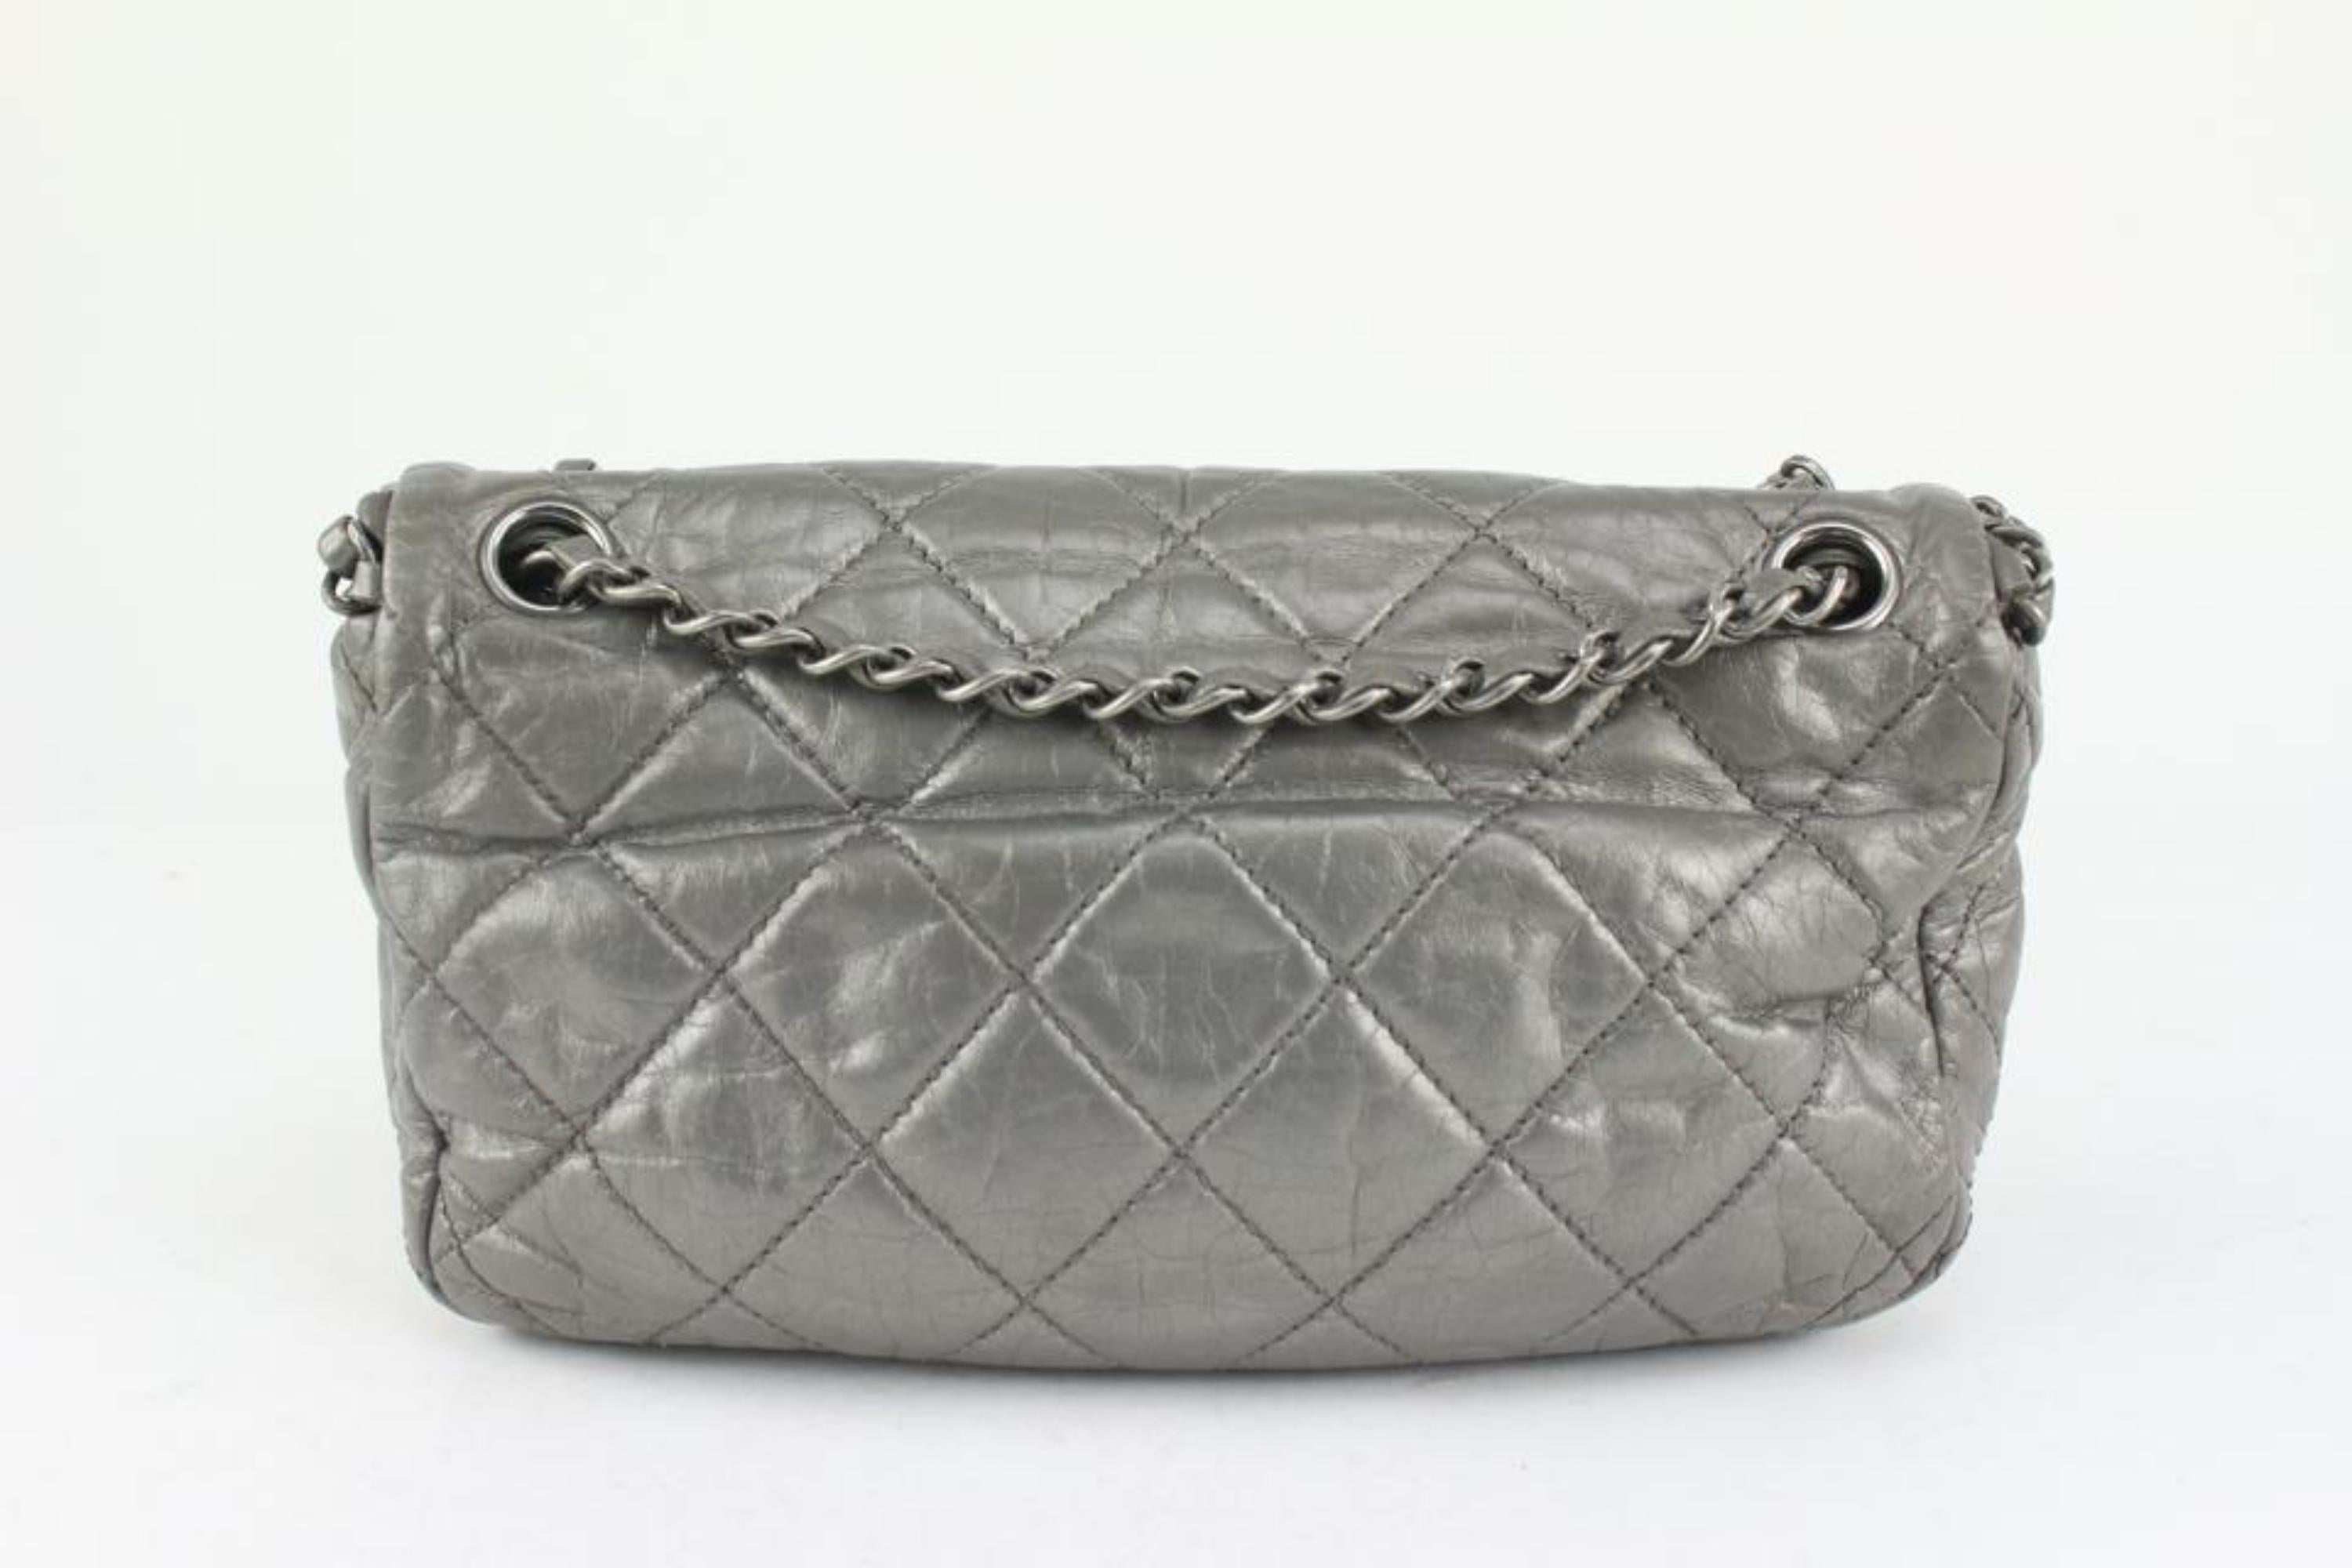 Chanel Grey Quilted Leather Chain Around Flap Bag 1122c4 For Sale 1